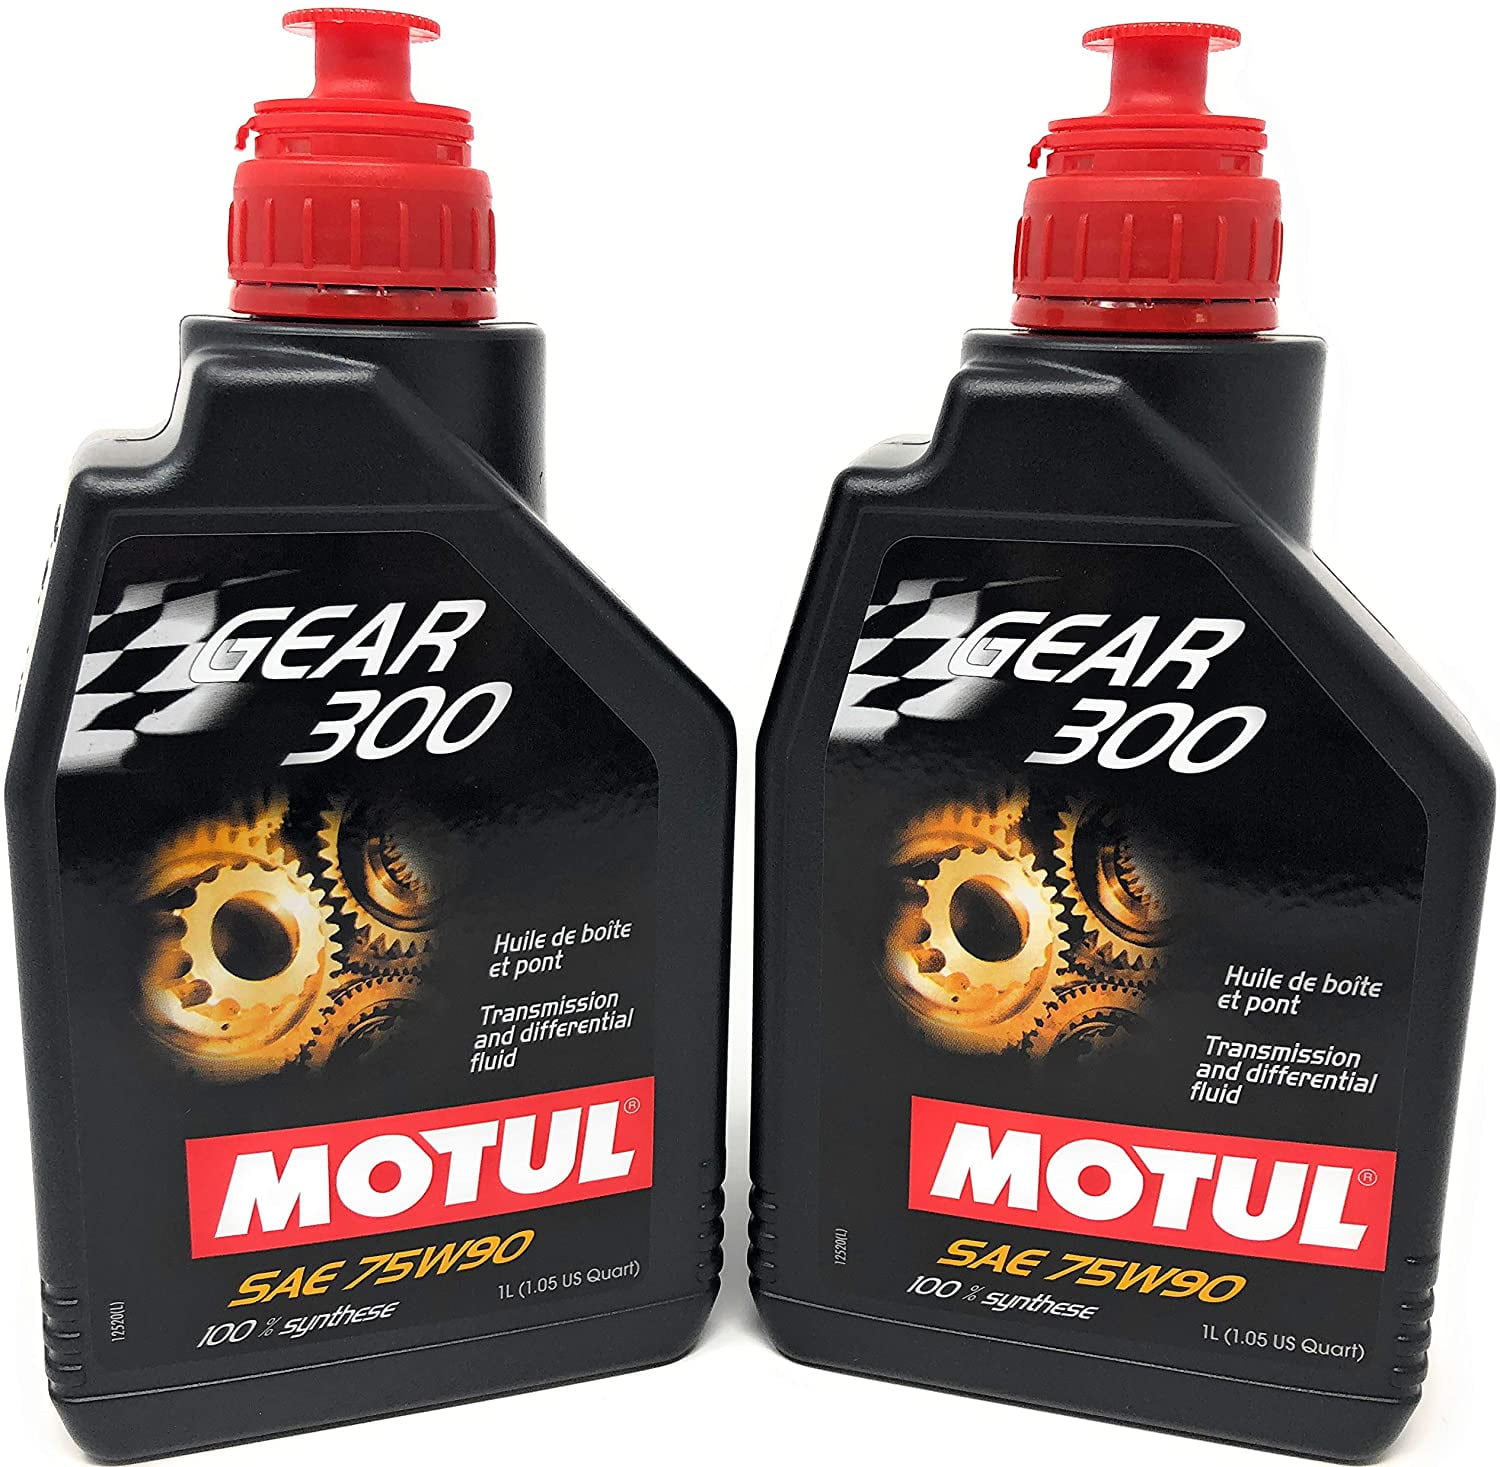 Motul Gear 300 75W90 Synthetic Transmission and Differential Fluid - Liter - 2 Pack, Motul 105777 GEAR 300 75W90 100% Synthetic Gear Tans Diff Oil (2 Liter) 2 Pack By Visit the Motul Store